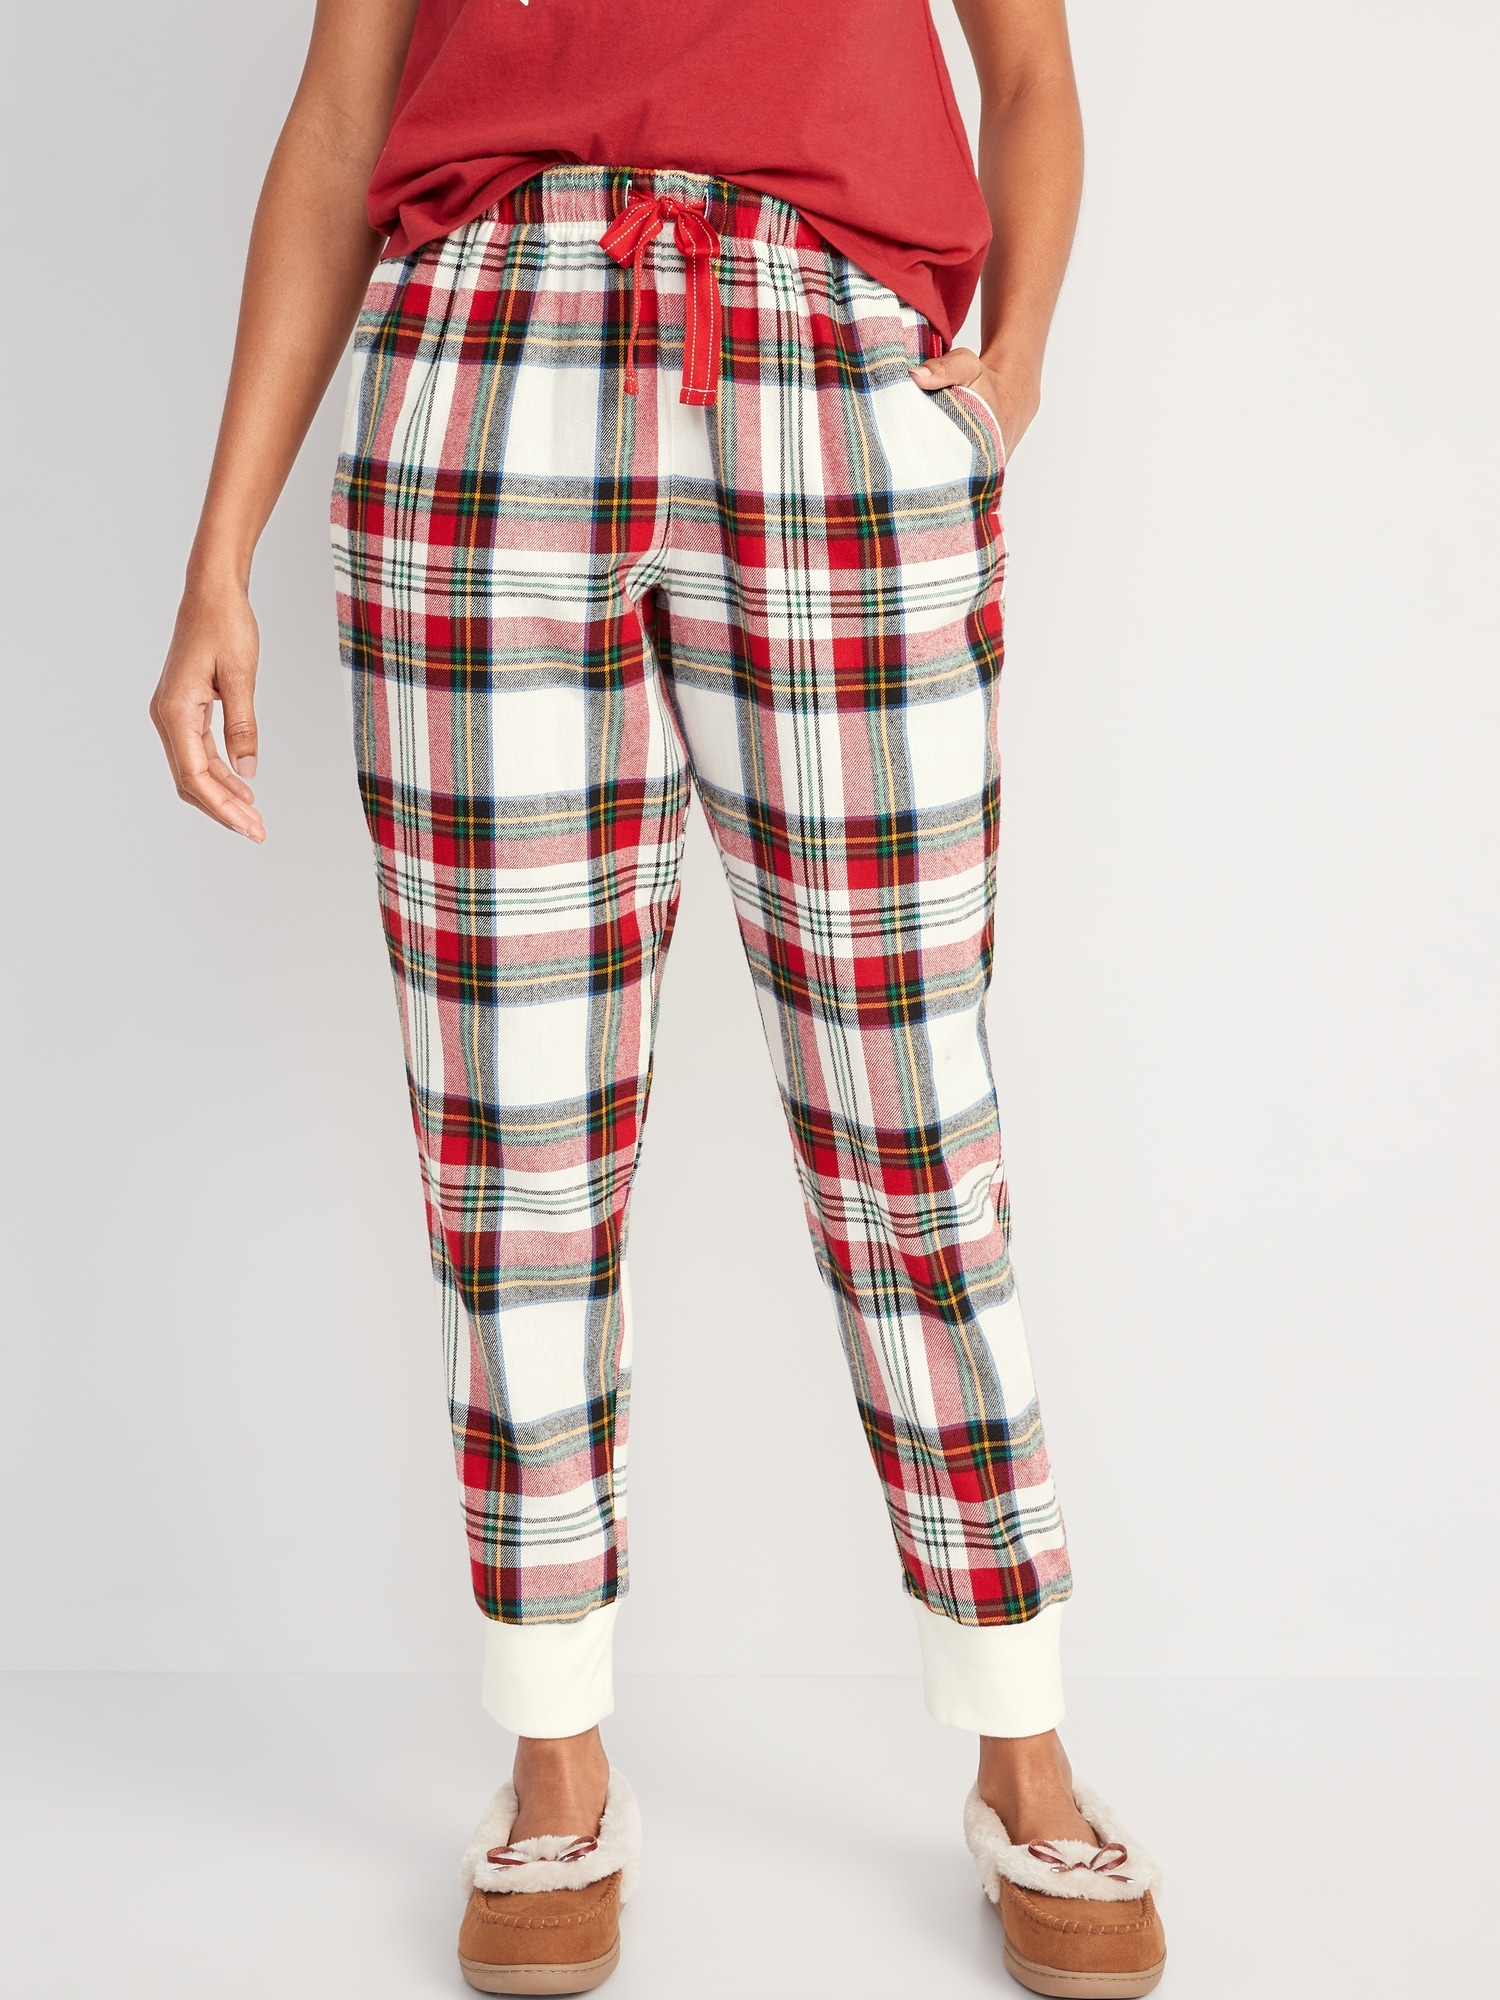 Printed Flannel Jogger Pajama Pants for Women, Old Navy